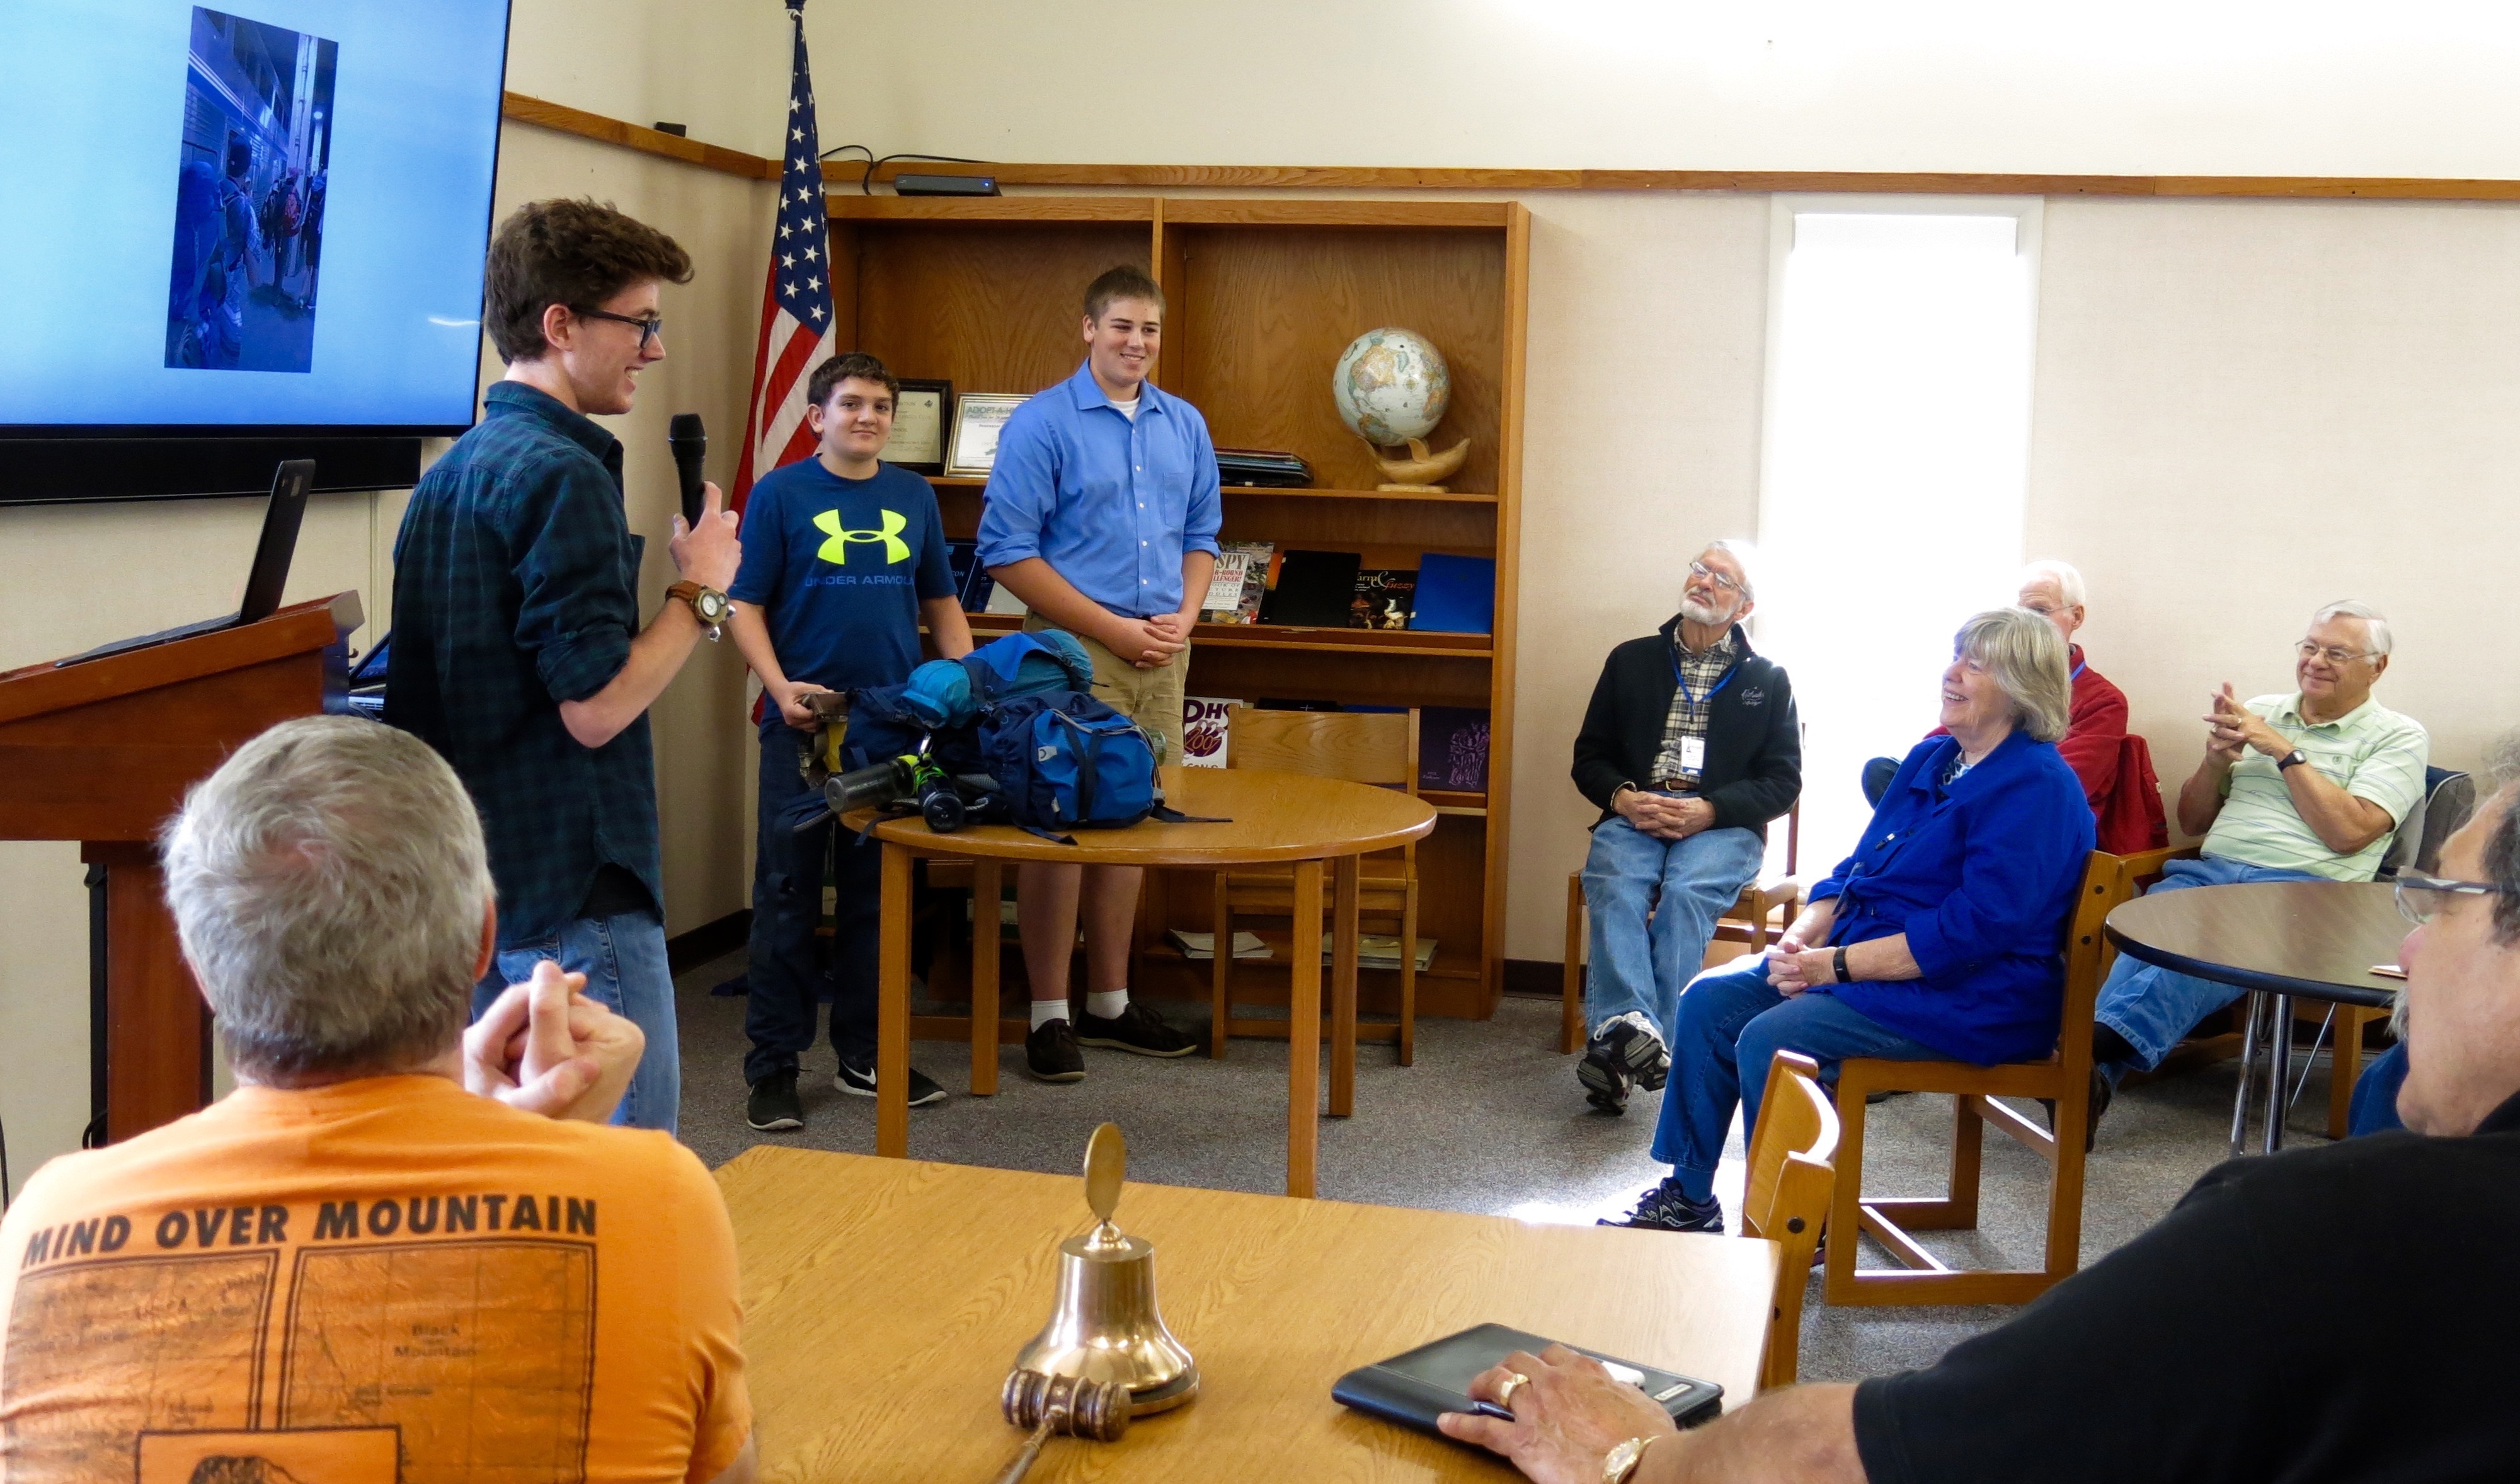 Boy scouts share story of 114-mile adventure.